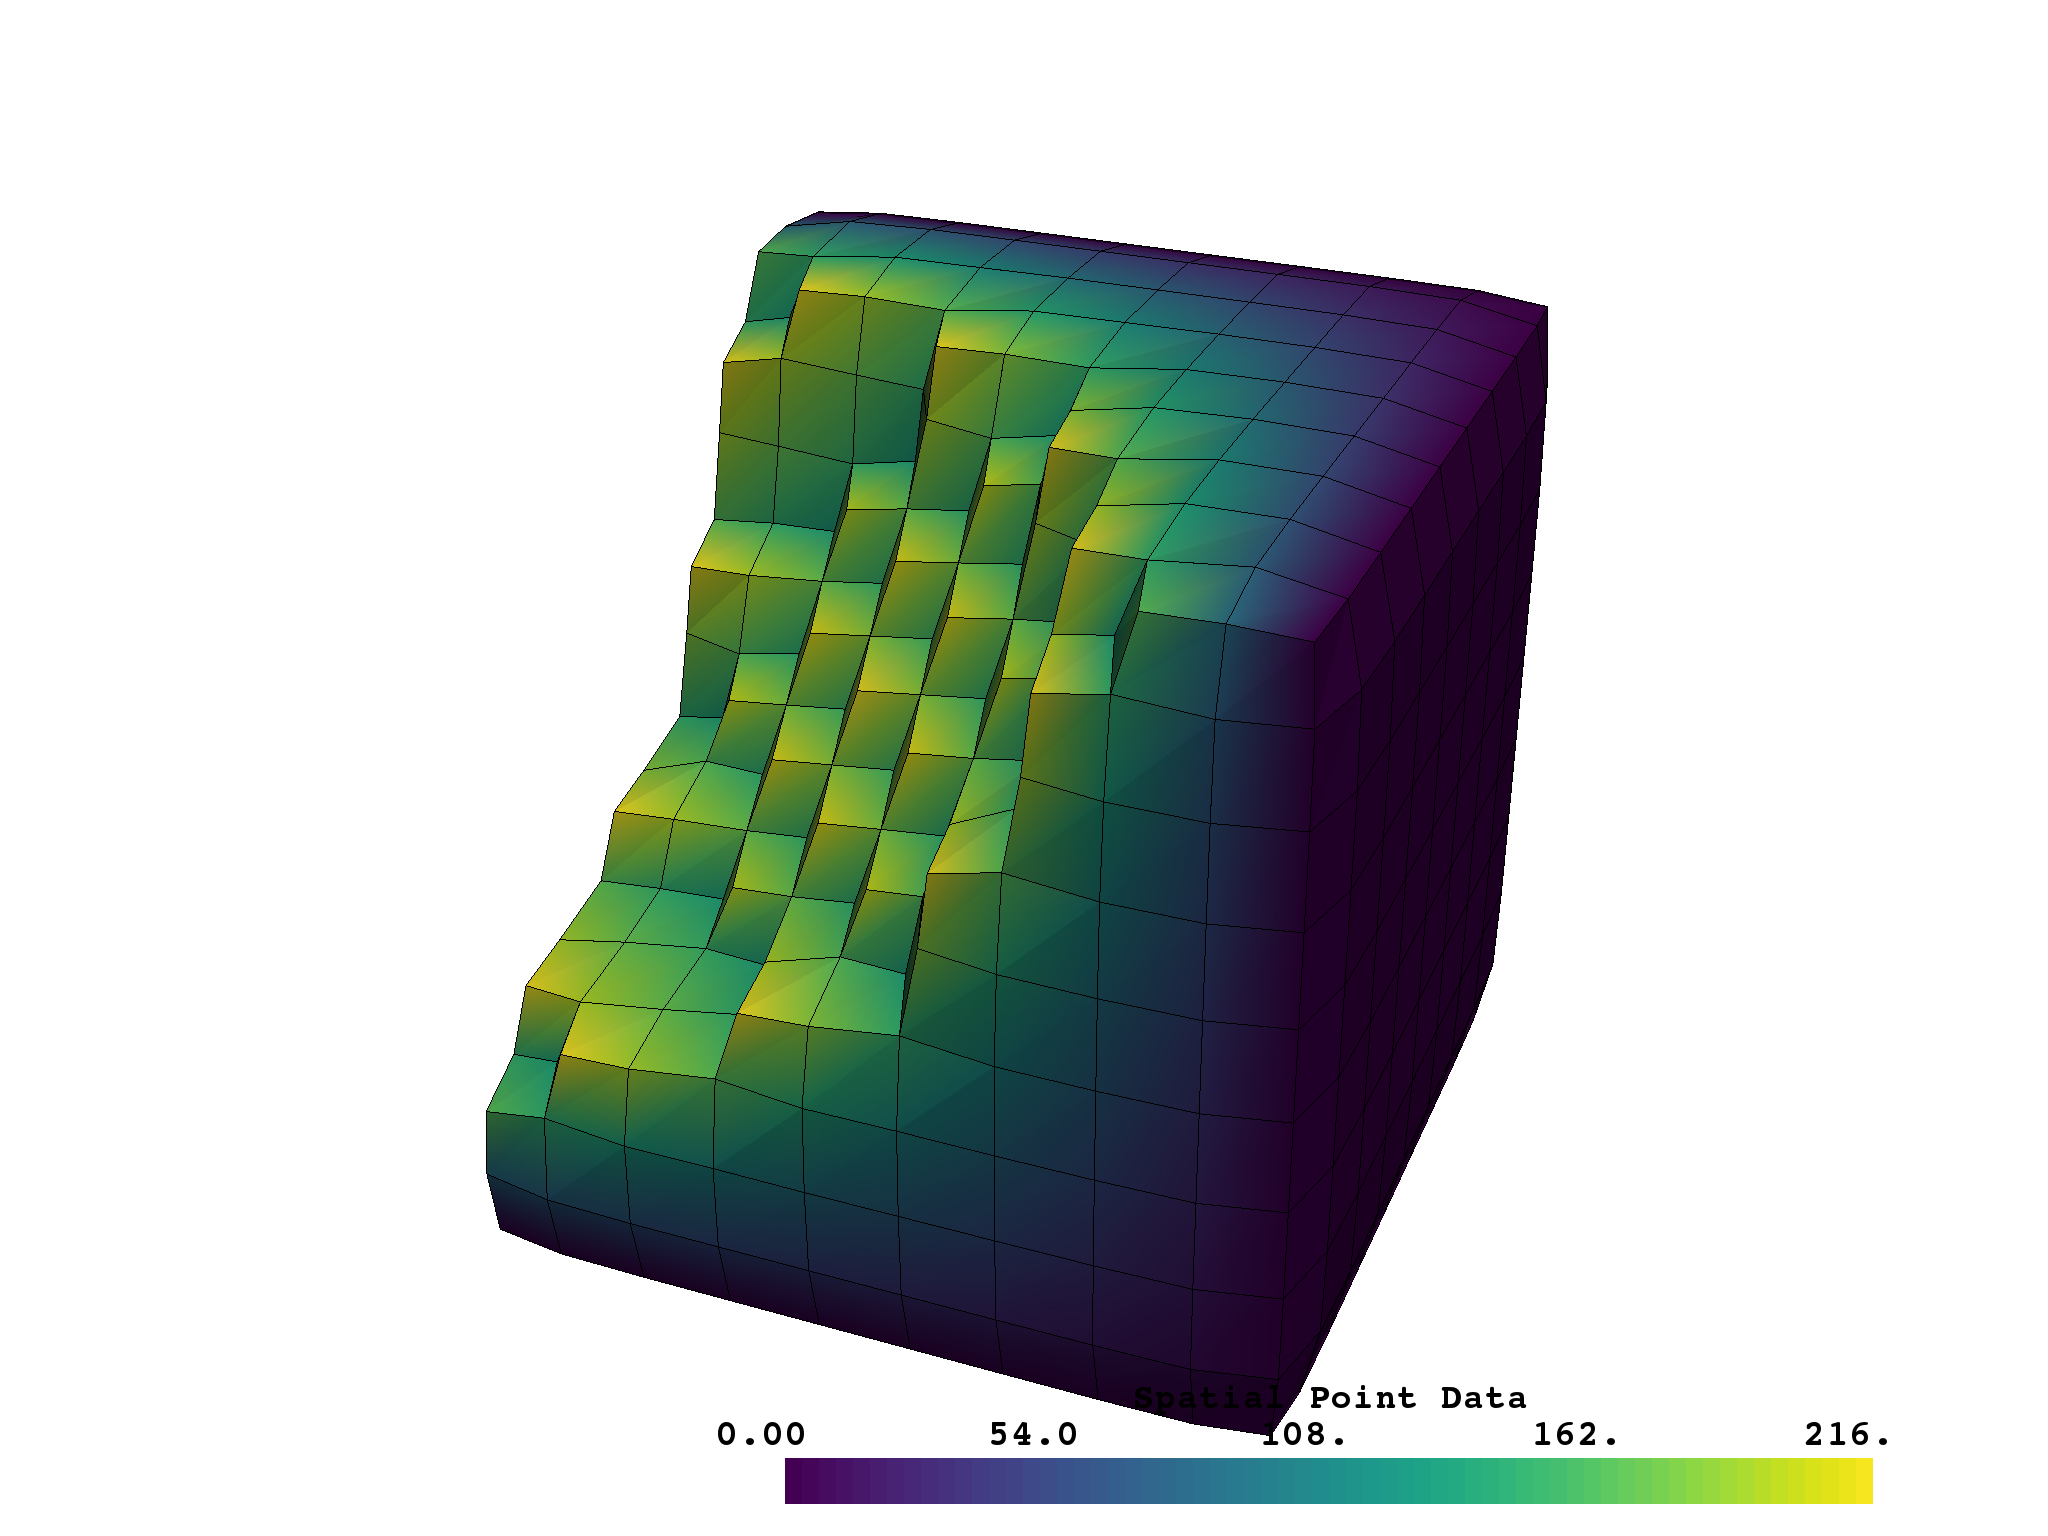 sphx_glr_volume-smoothing_003.png